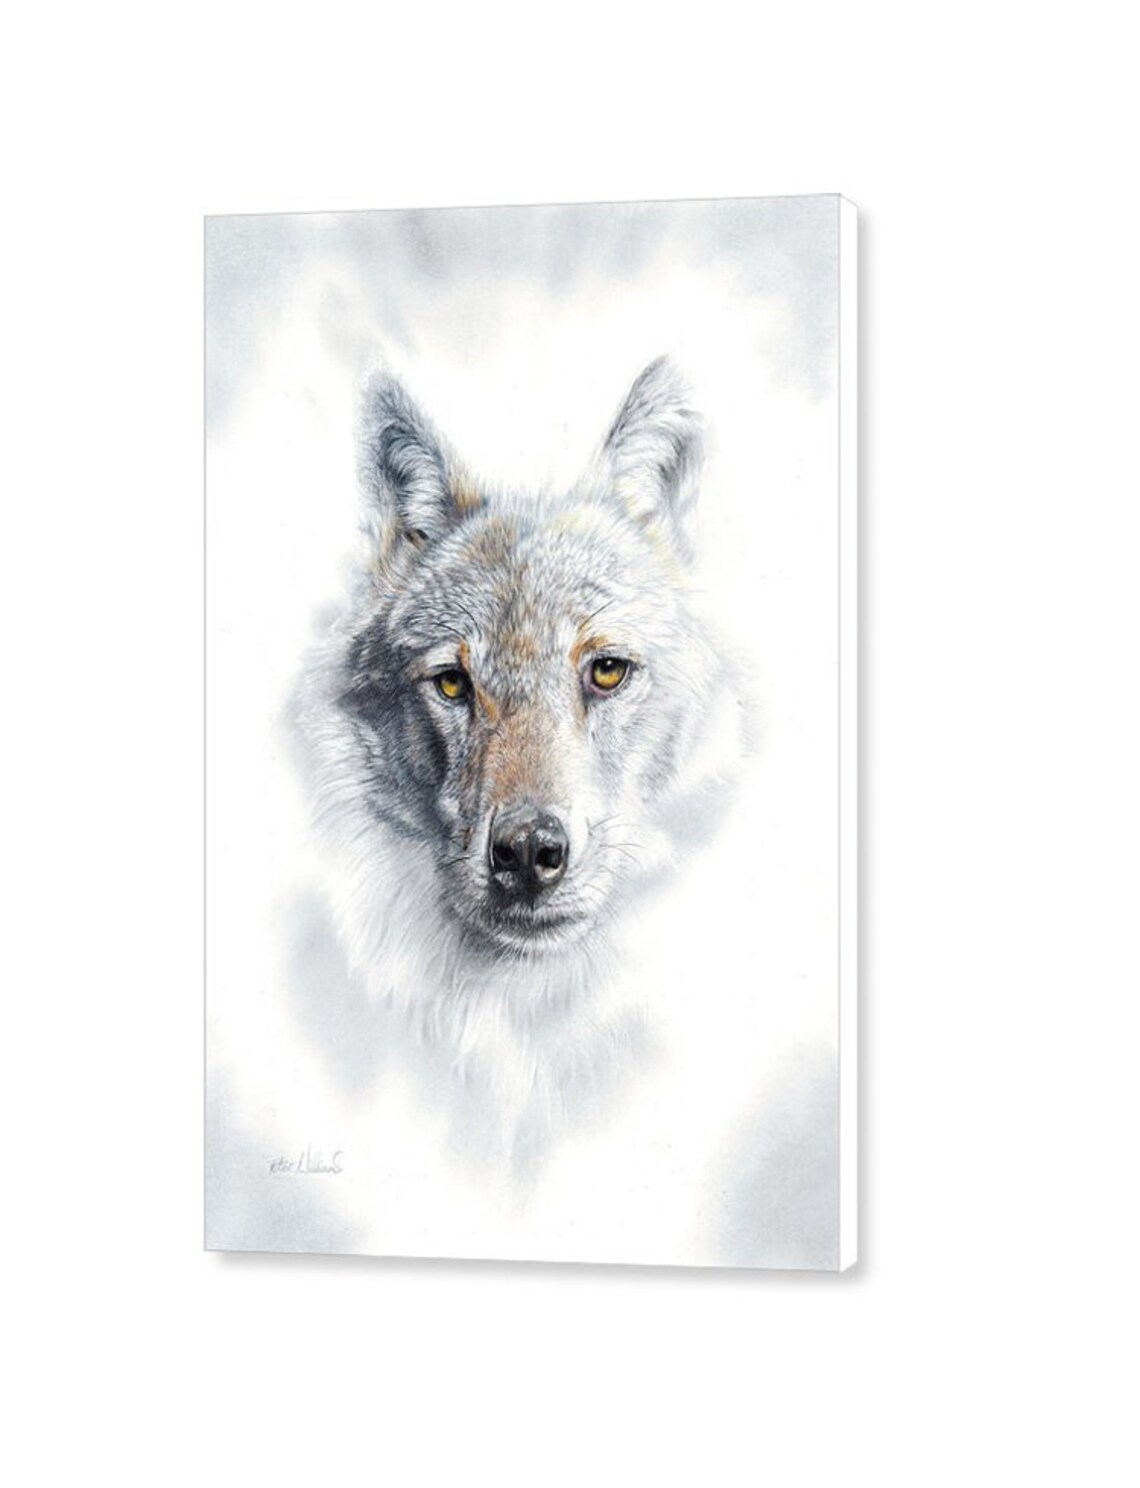 Fade To Grey LARGE CANVAS wolf Print Grey Wolf by Peter | Etsy